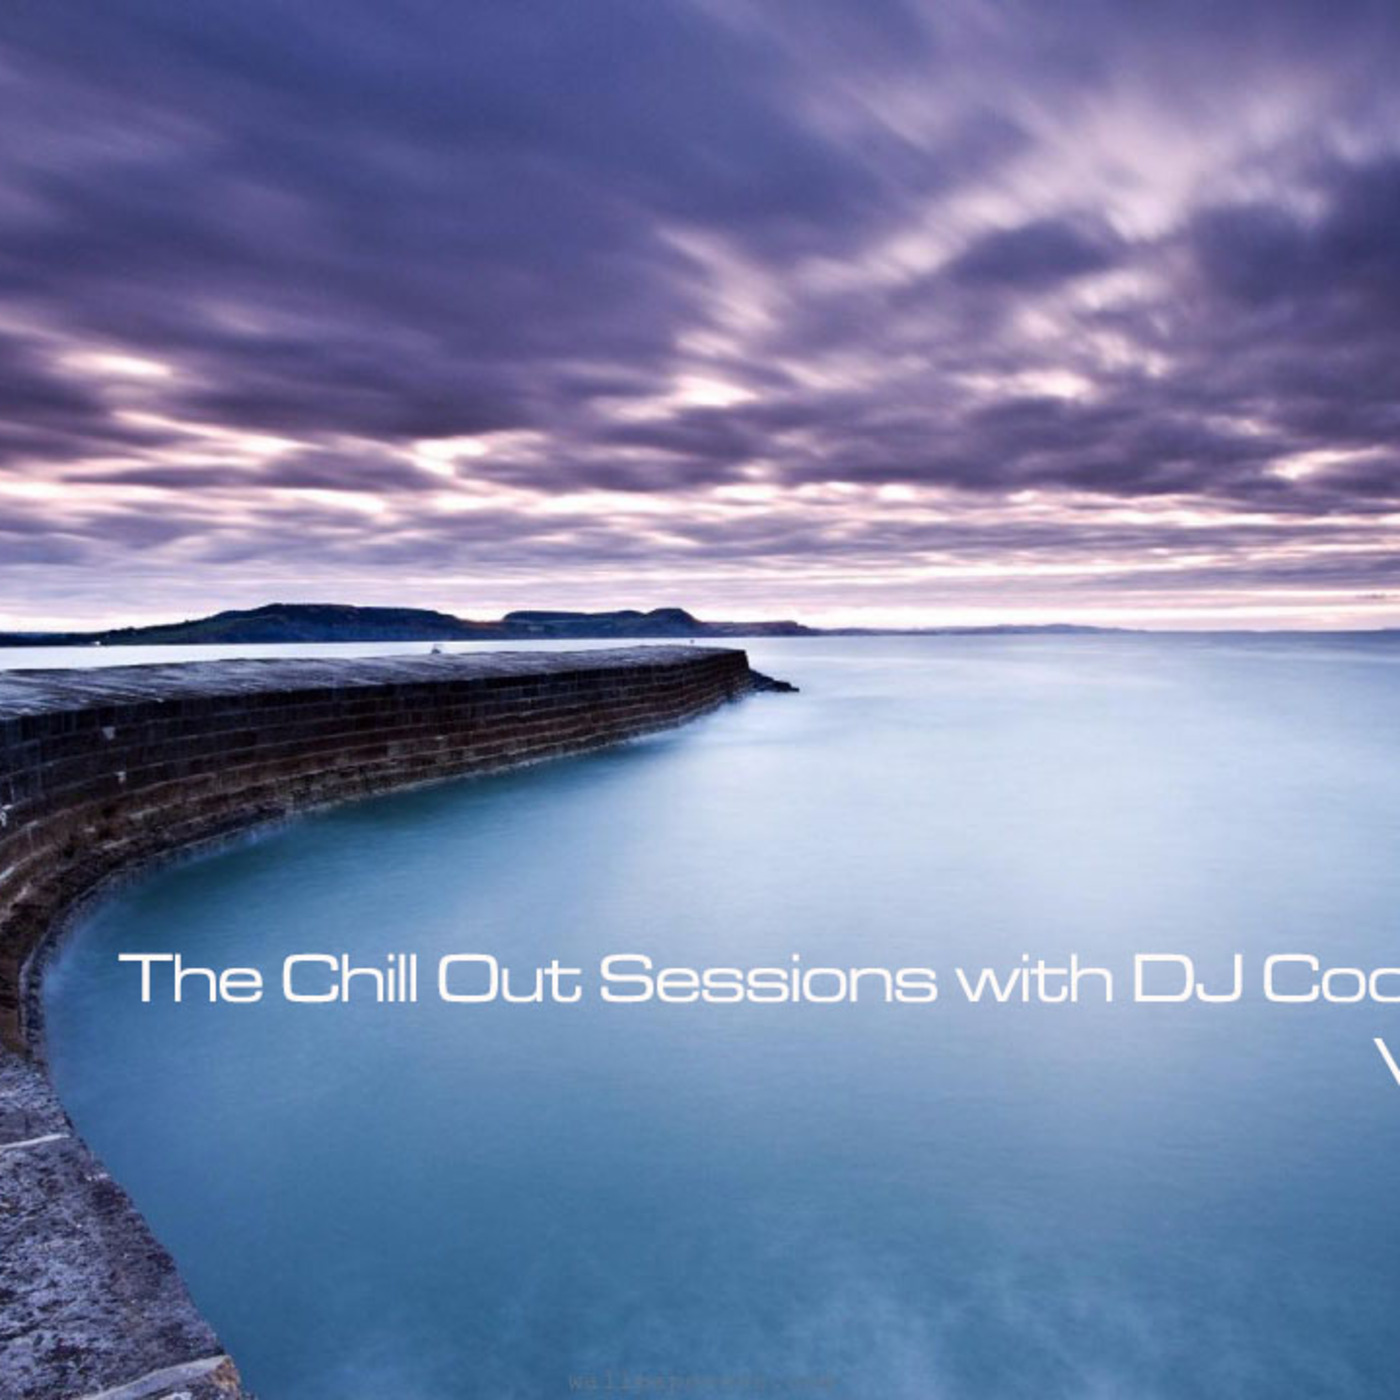 The Chill Out Sessions with DJ Cool Carla Vol 34